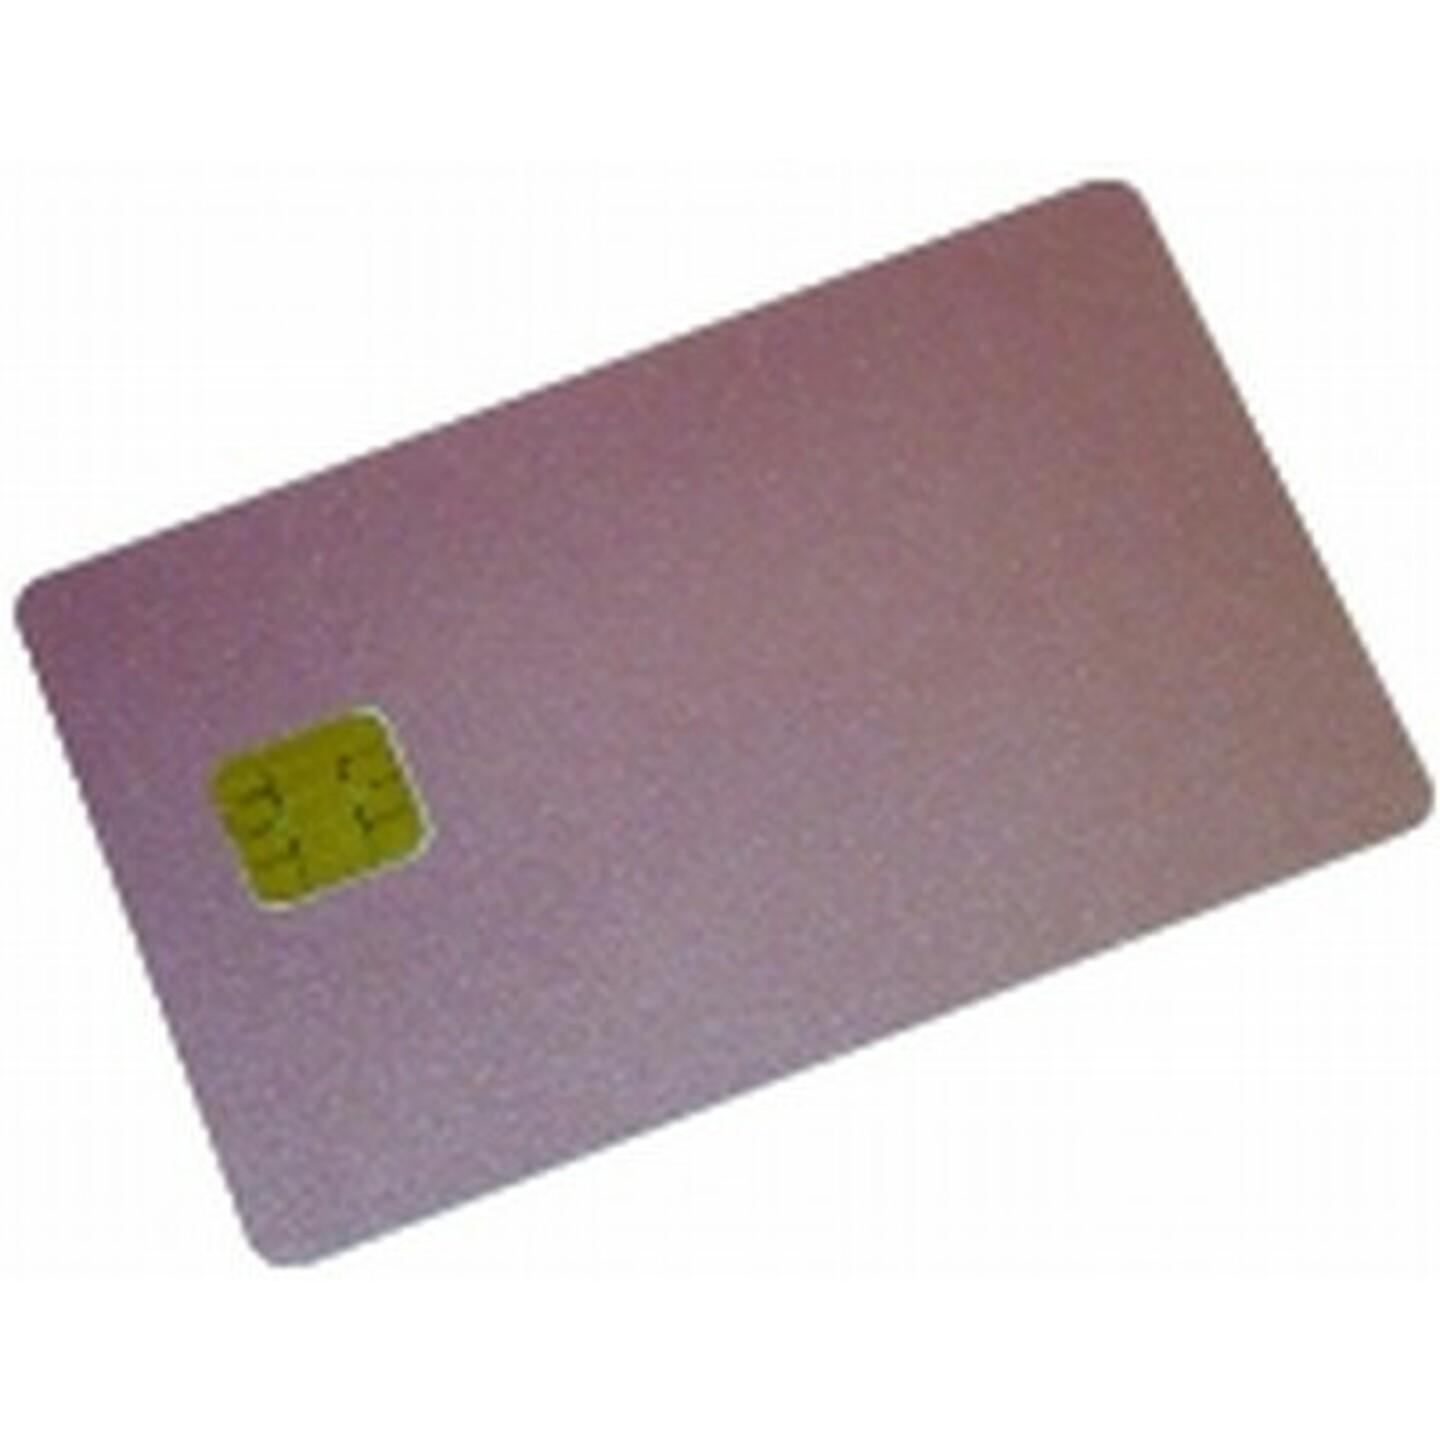 Wafer Card with PIC16F84A  24LC16B inbuilt.